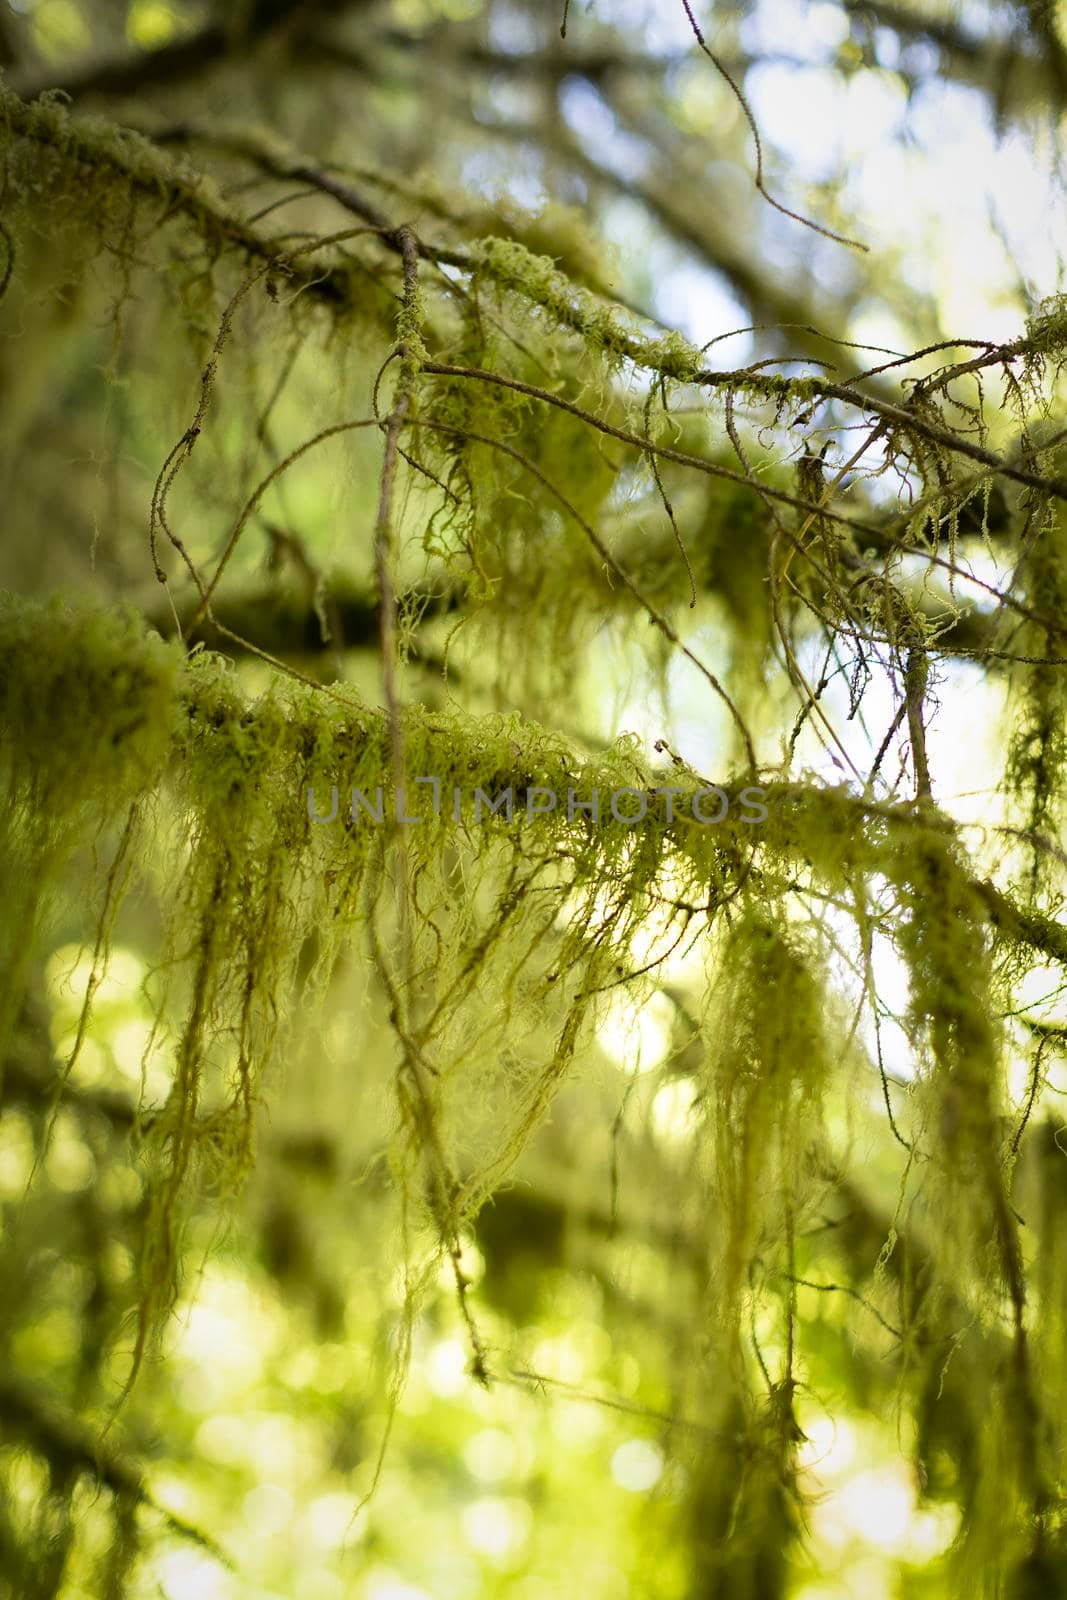 Moss growing in Hoh rainforest by lisaldw